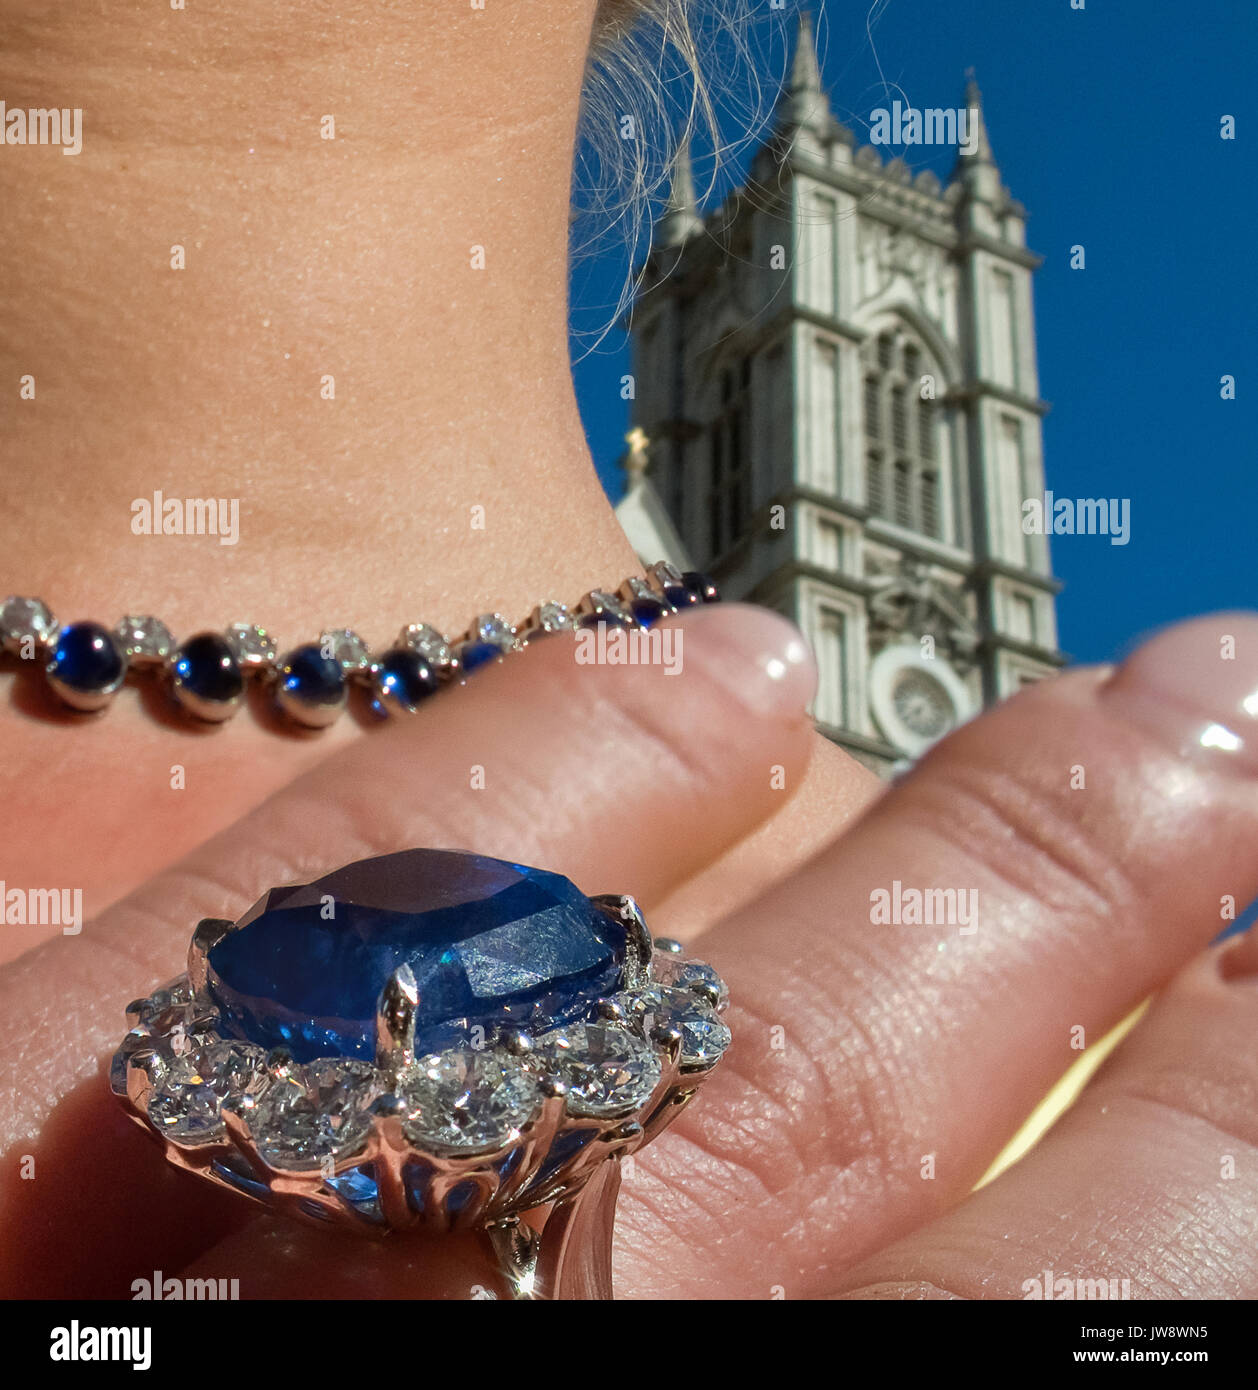 A Model Shows Off Her Imitation Kate Middleton Engagement Ring Stock Photo Alamy